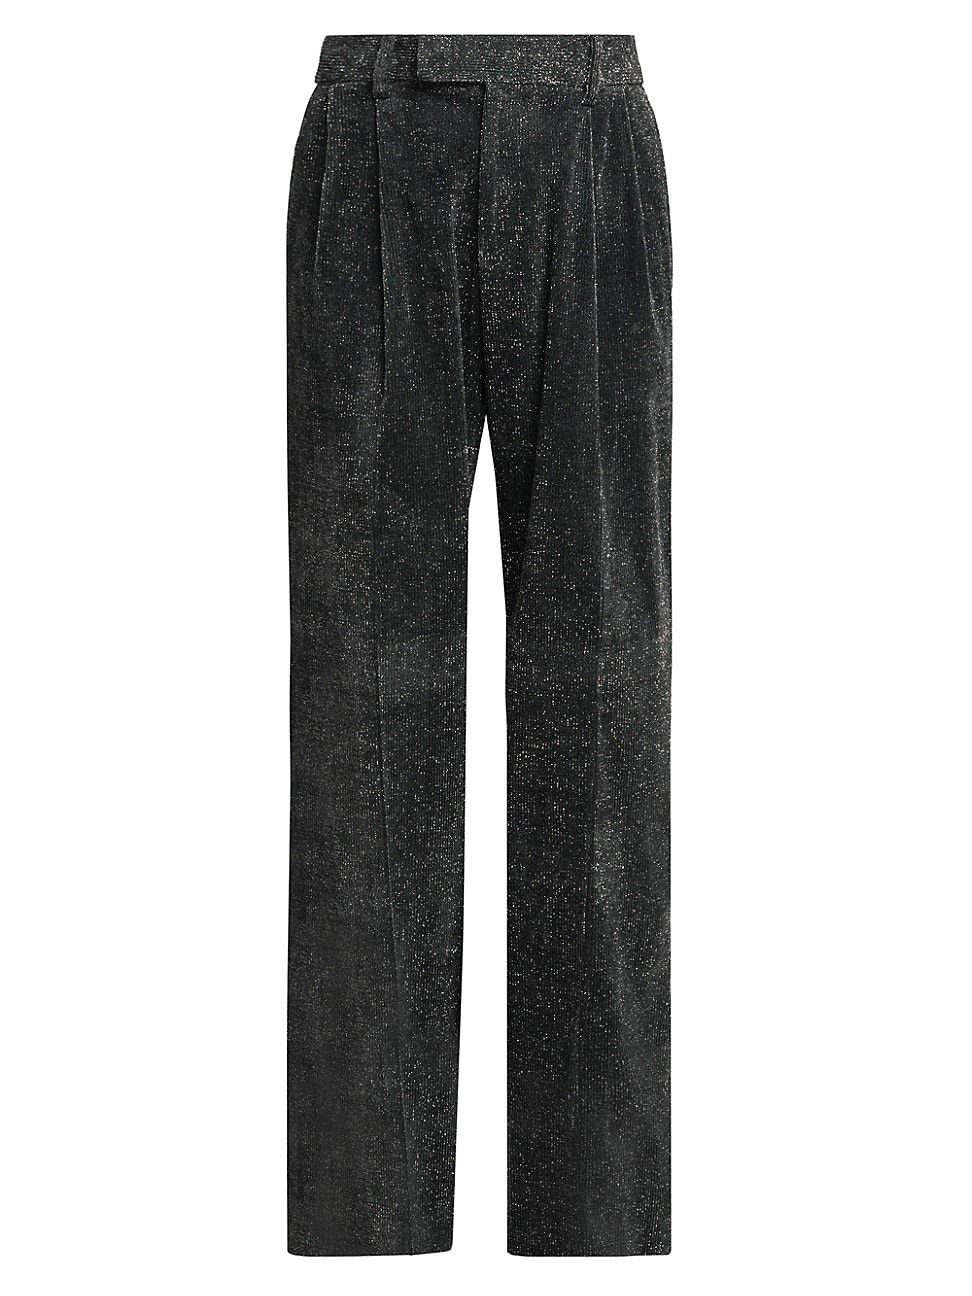 Amiri Double-Pleated Shimmer Pants